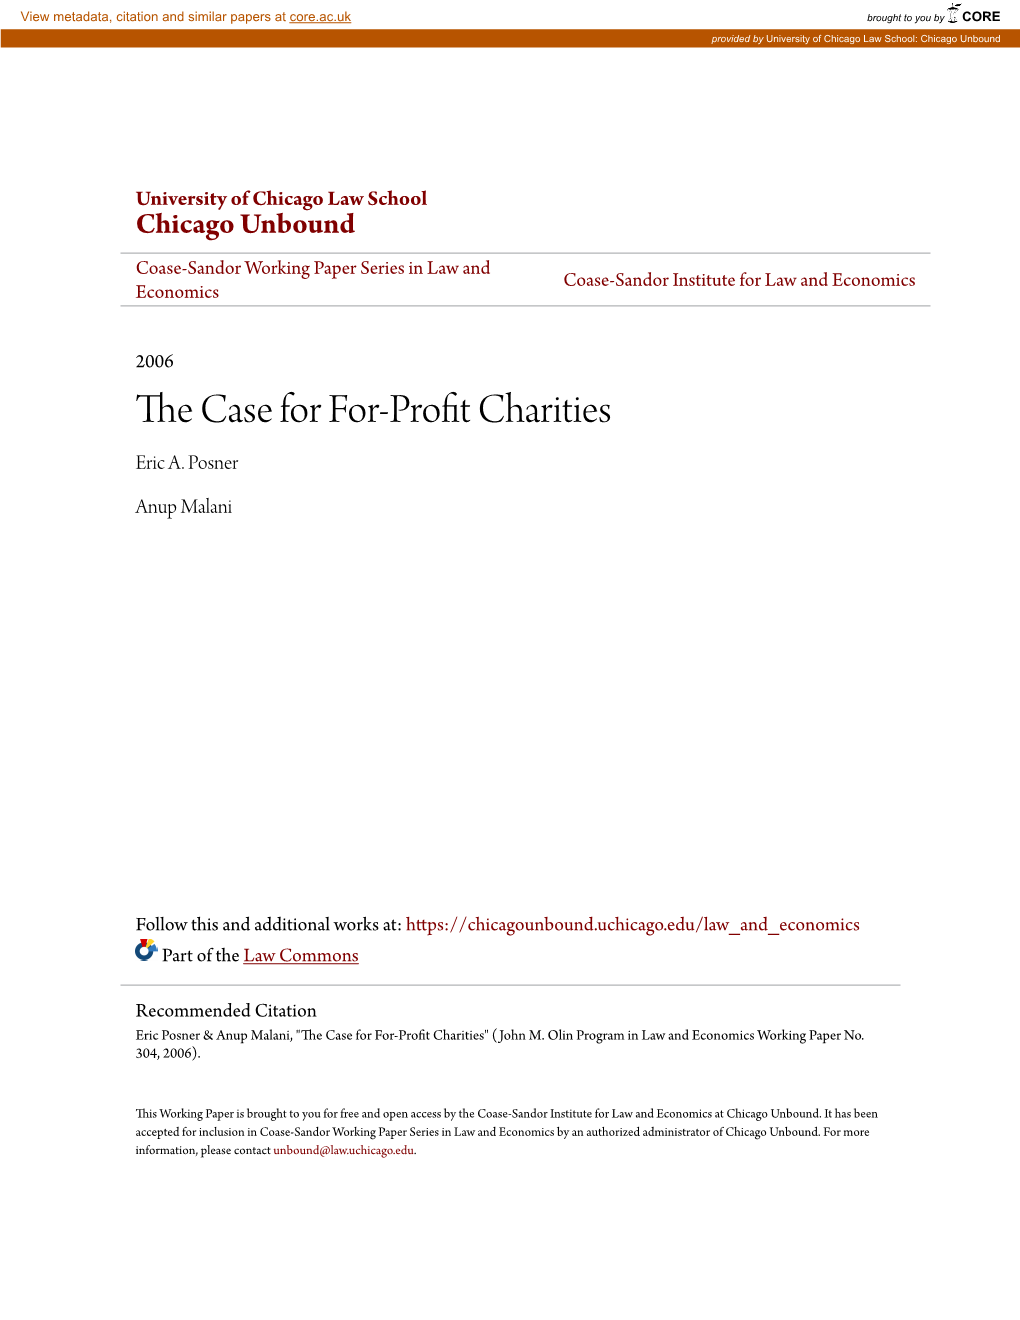 The Case for For-Profit Charities